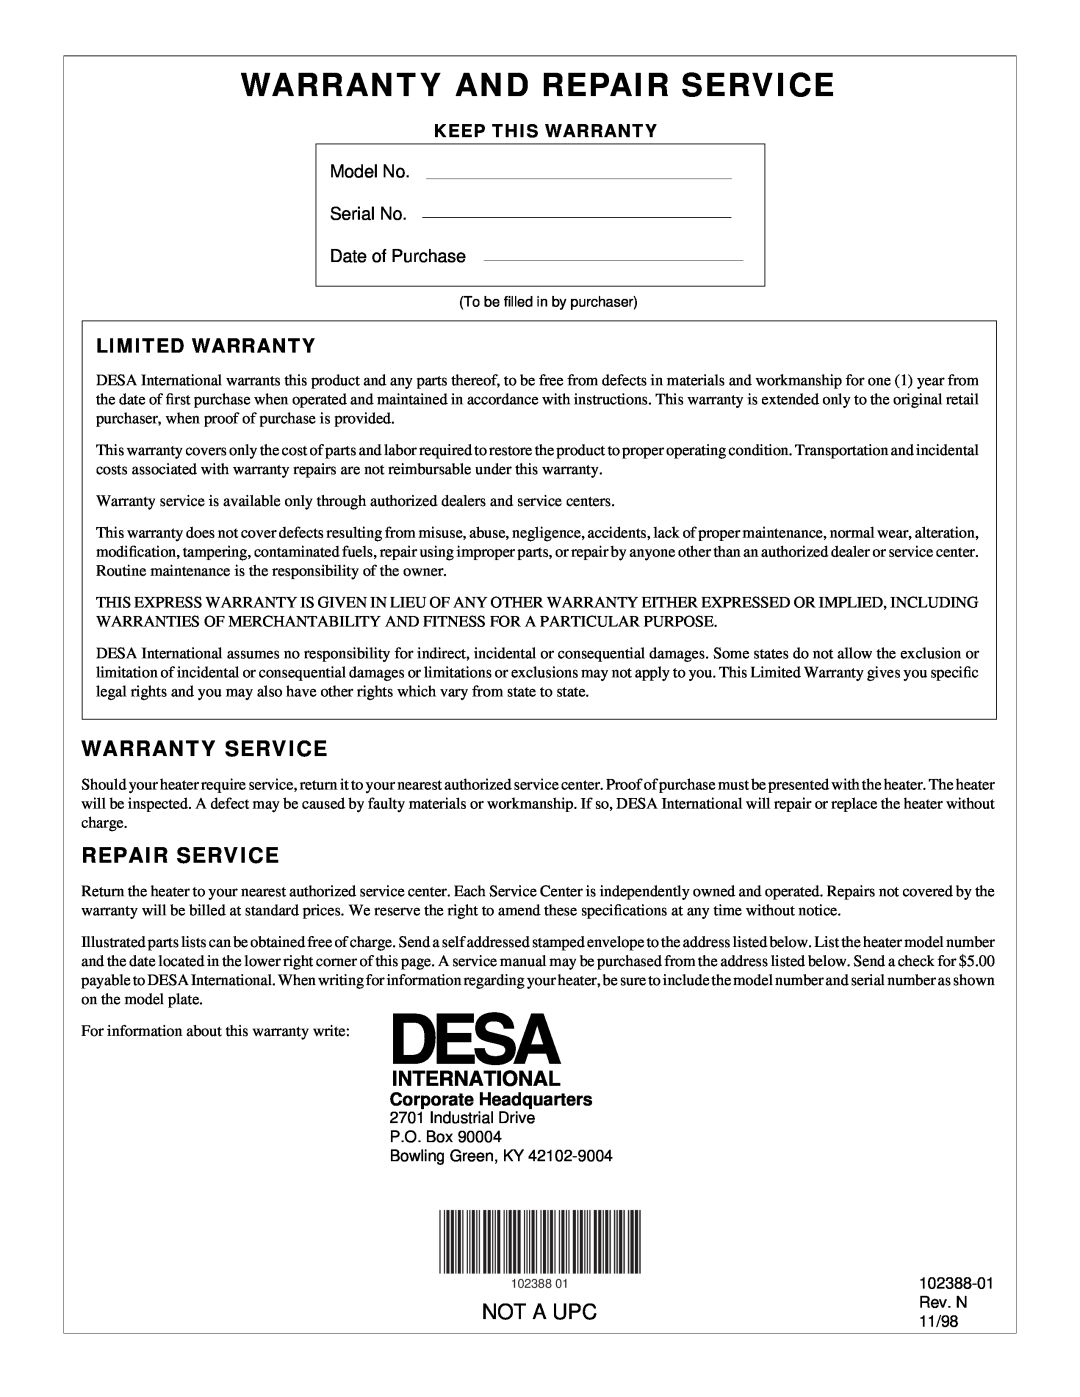 Desa and 55 owner manual Warranty Service, Limited Warranty, Warranty And Repair Service, Not A Upc 